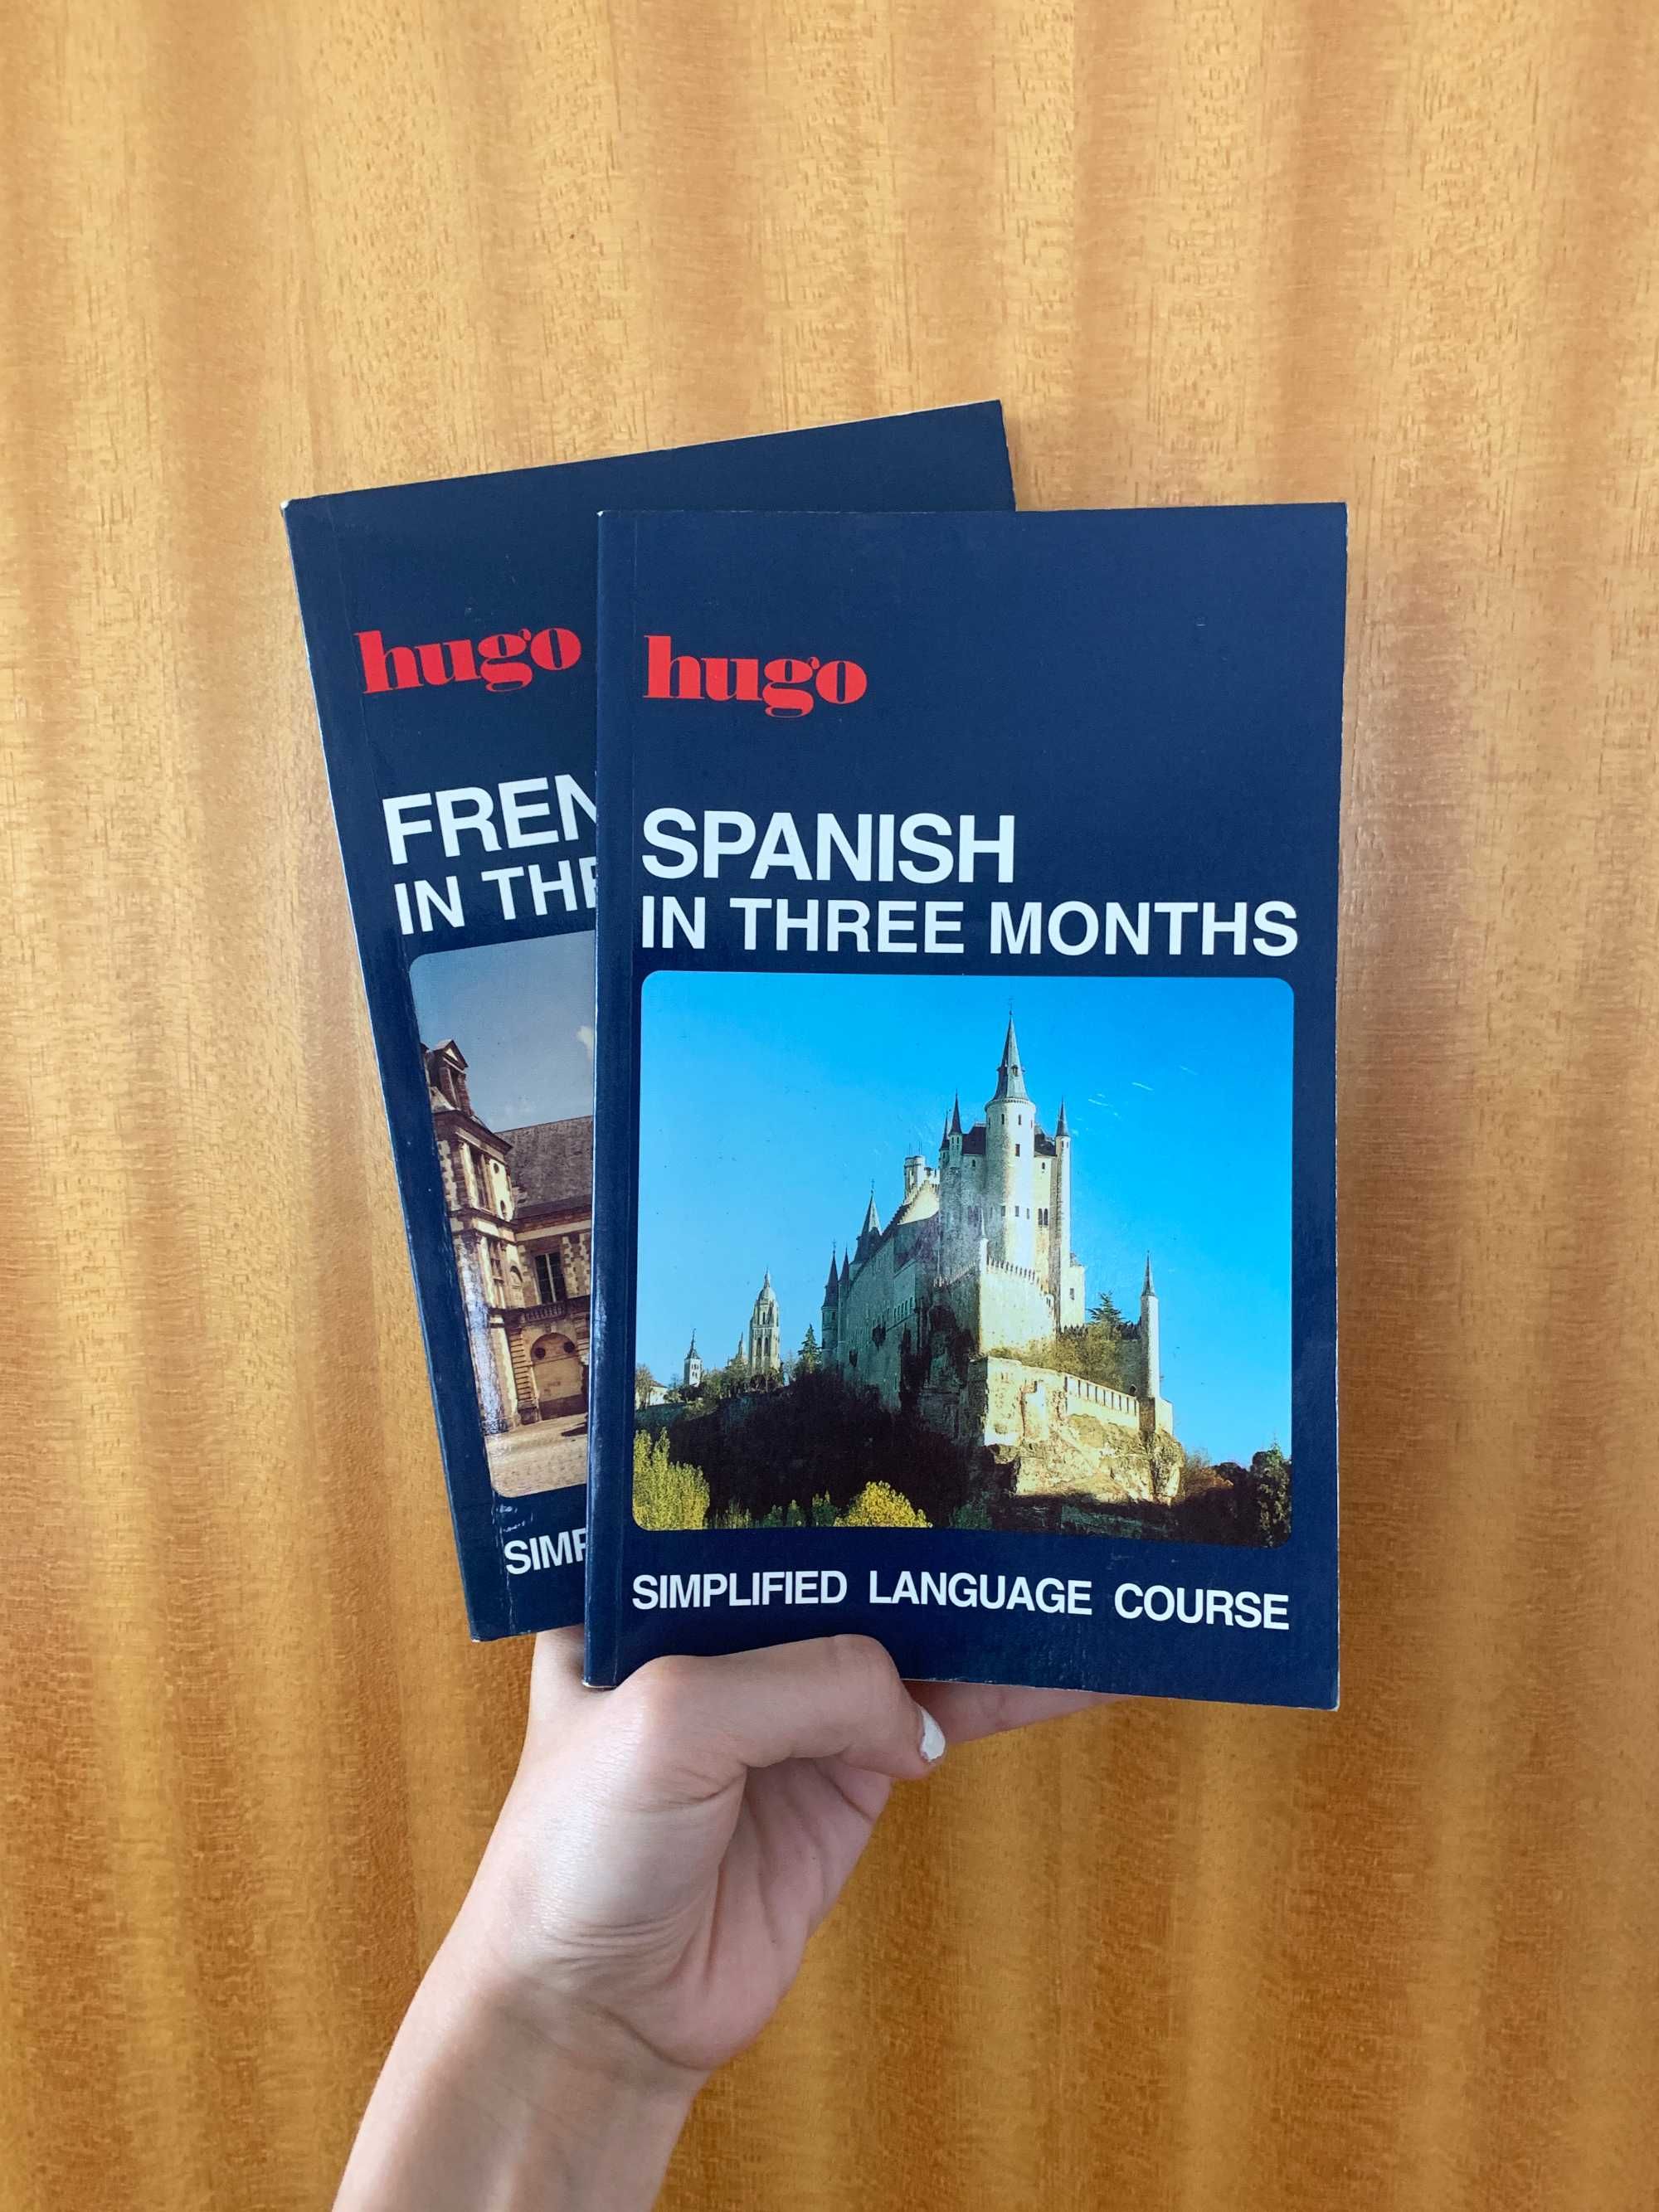 Pack de Livros: “French in Three Months” e “Spanish in Three Months”